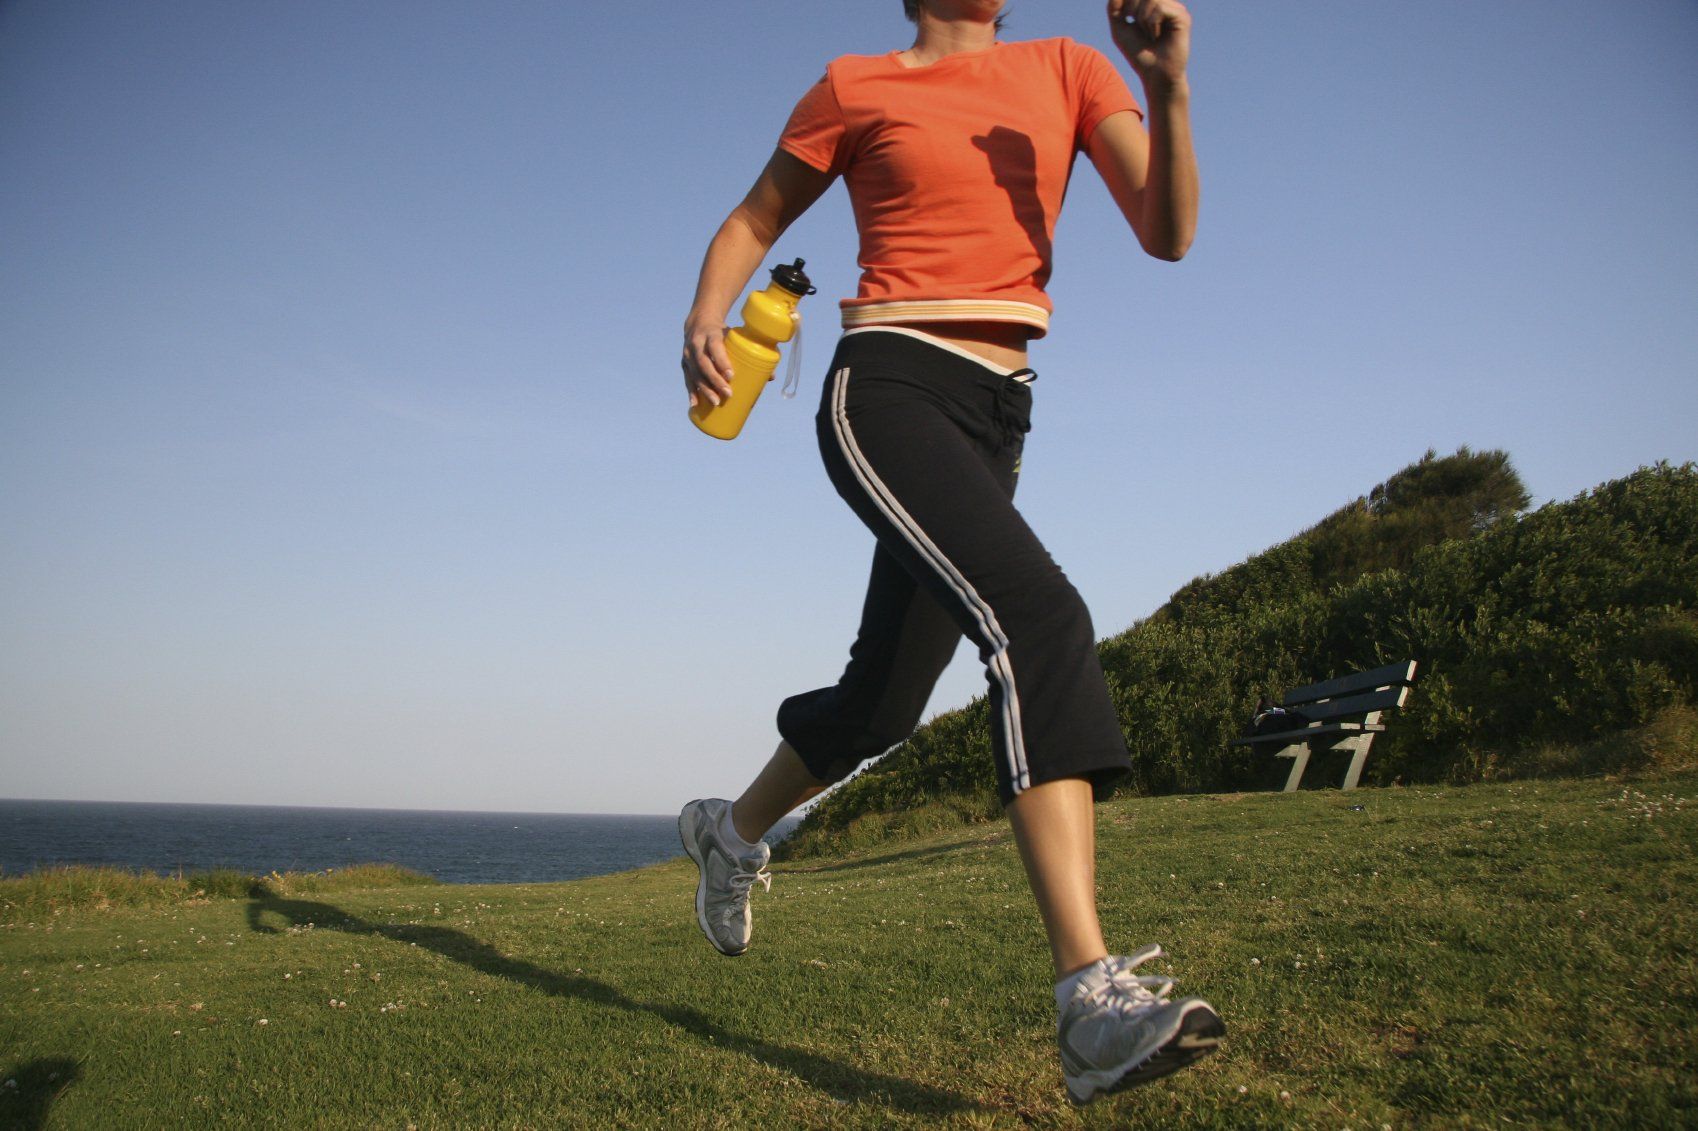 Young lady jogging across a grass field holding a yellow water bottle in her right hand.